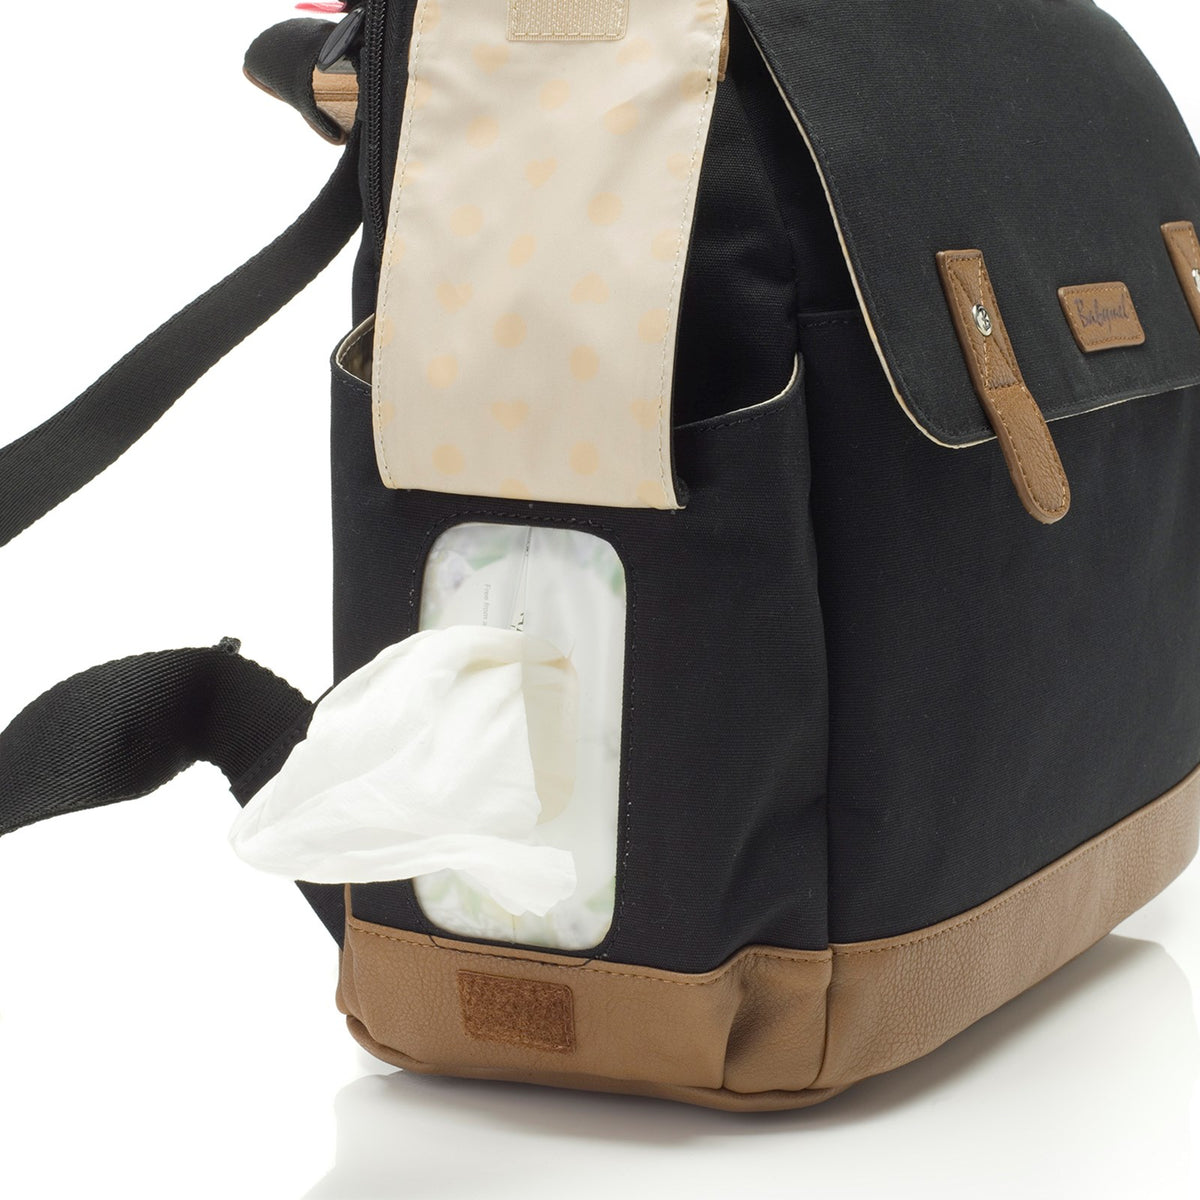 Robyn eco Convertible Backpack Black